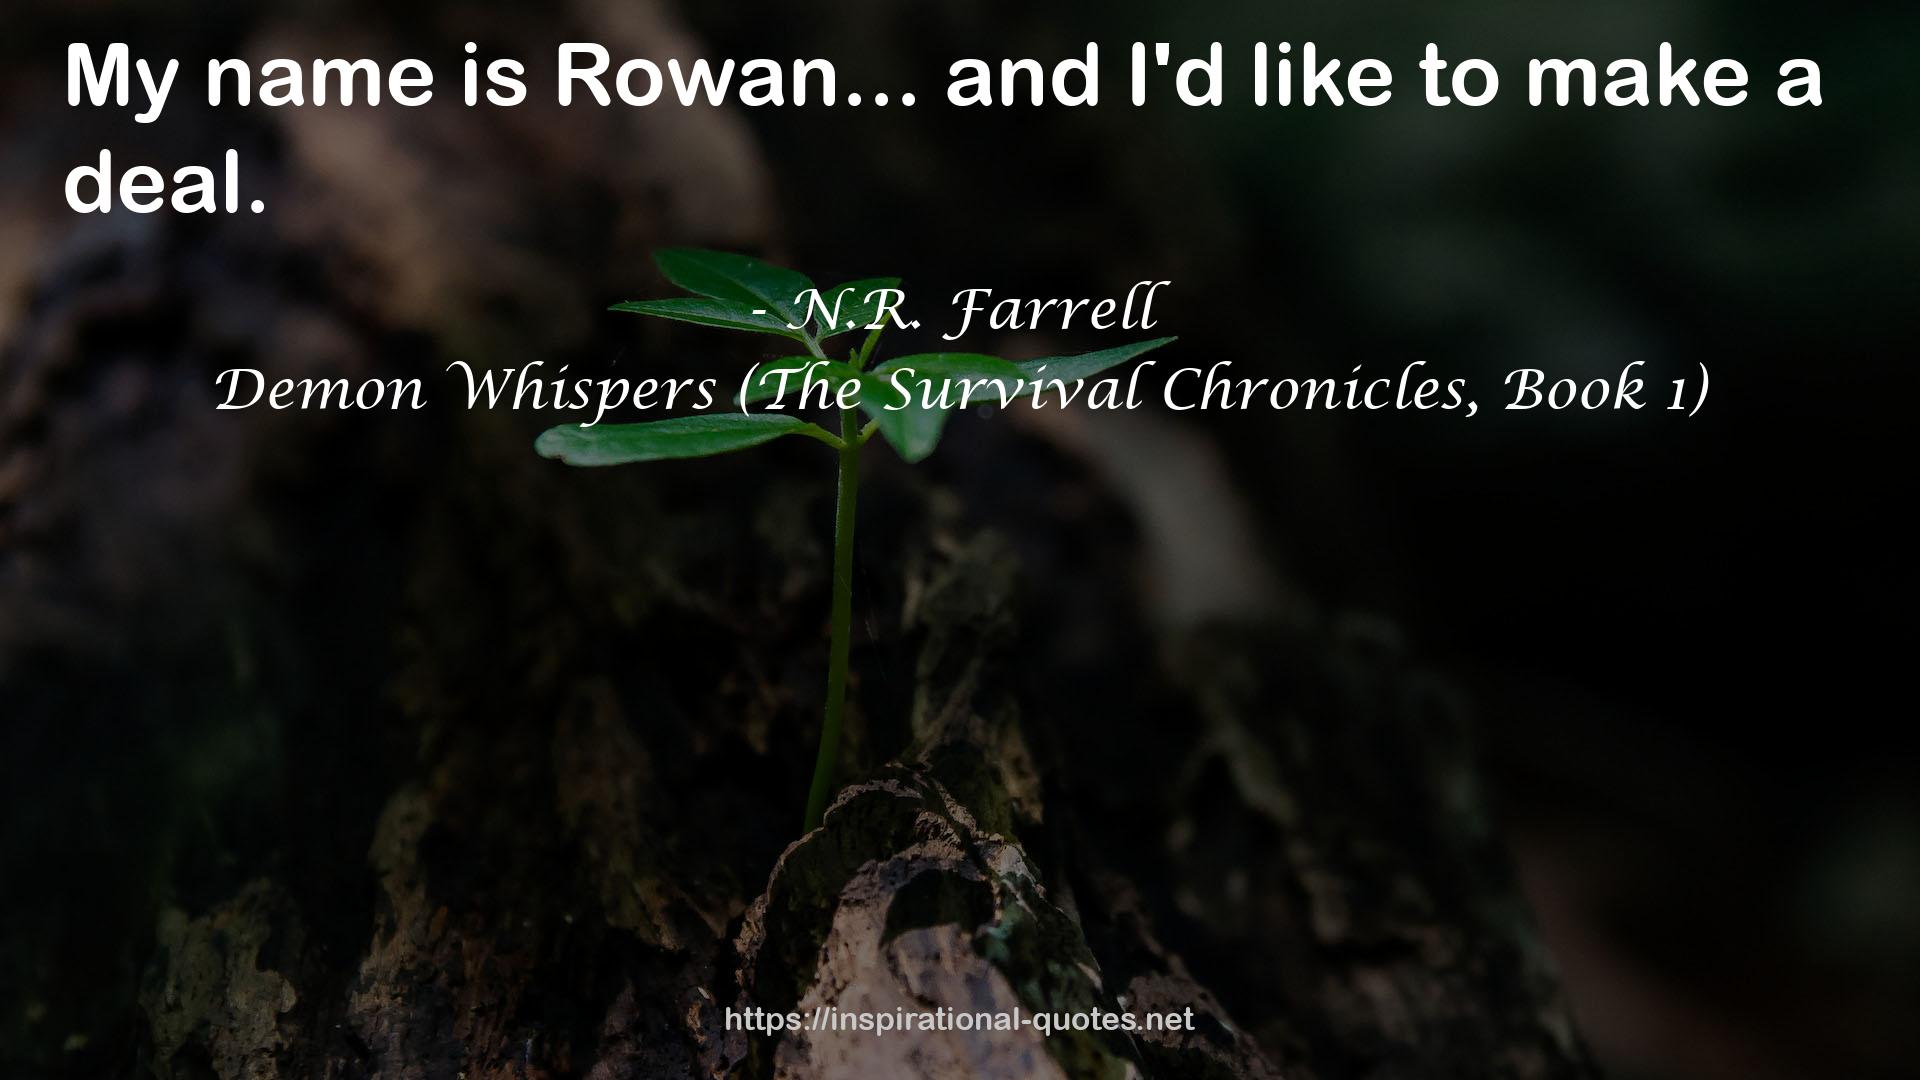 Demon Whispers (The Survival Chronicles, Book 1) QUOTES